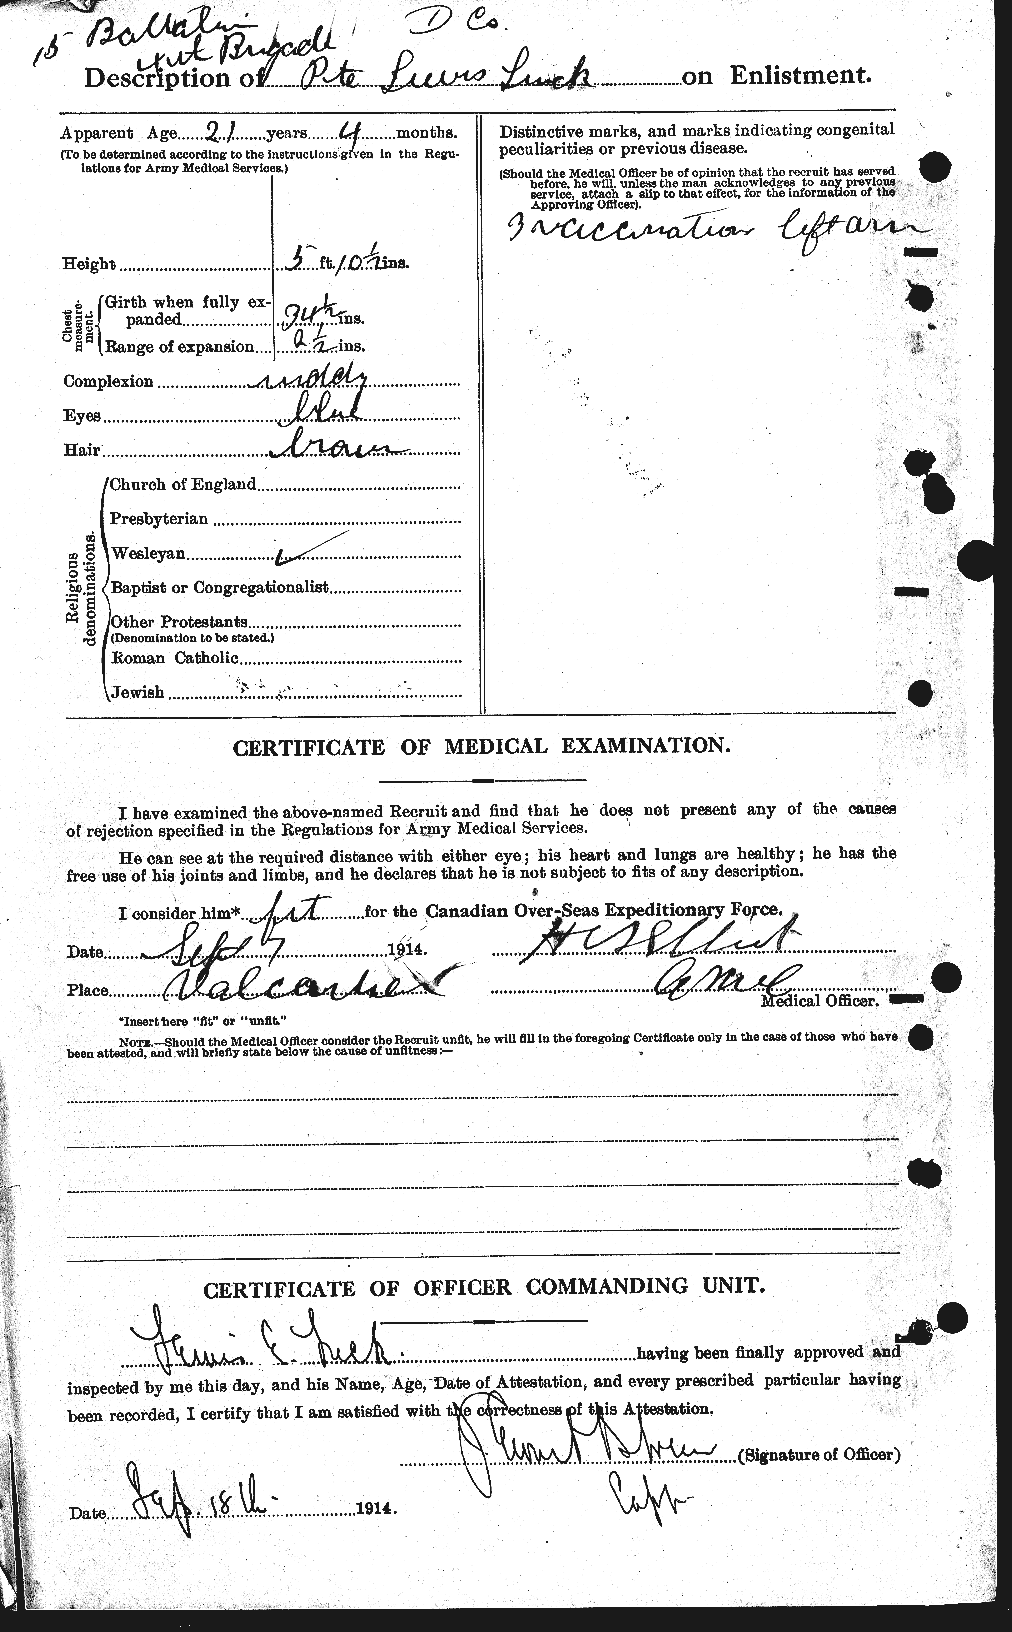 Personnel Records of the First World War - CEF 480342b